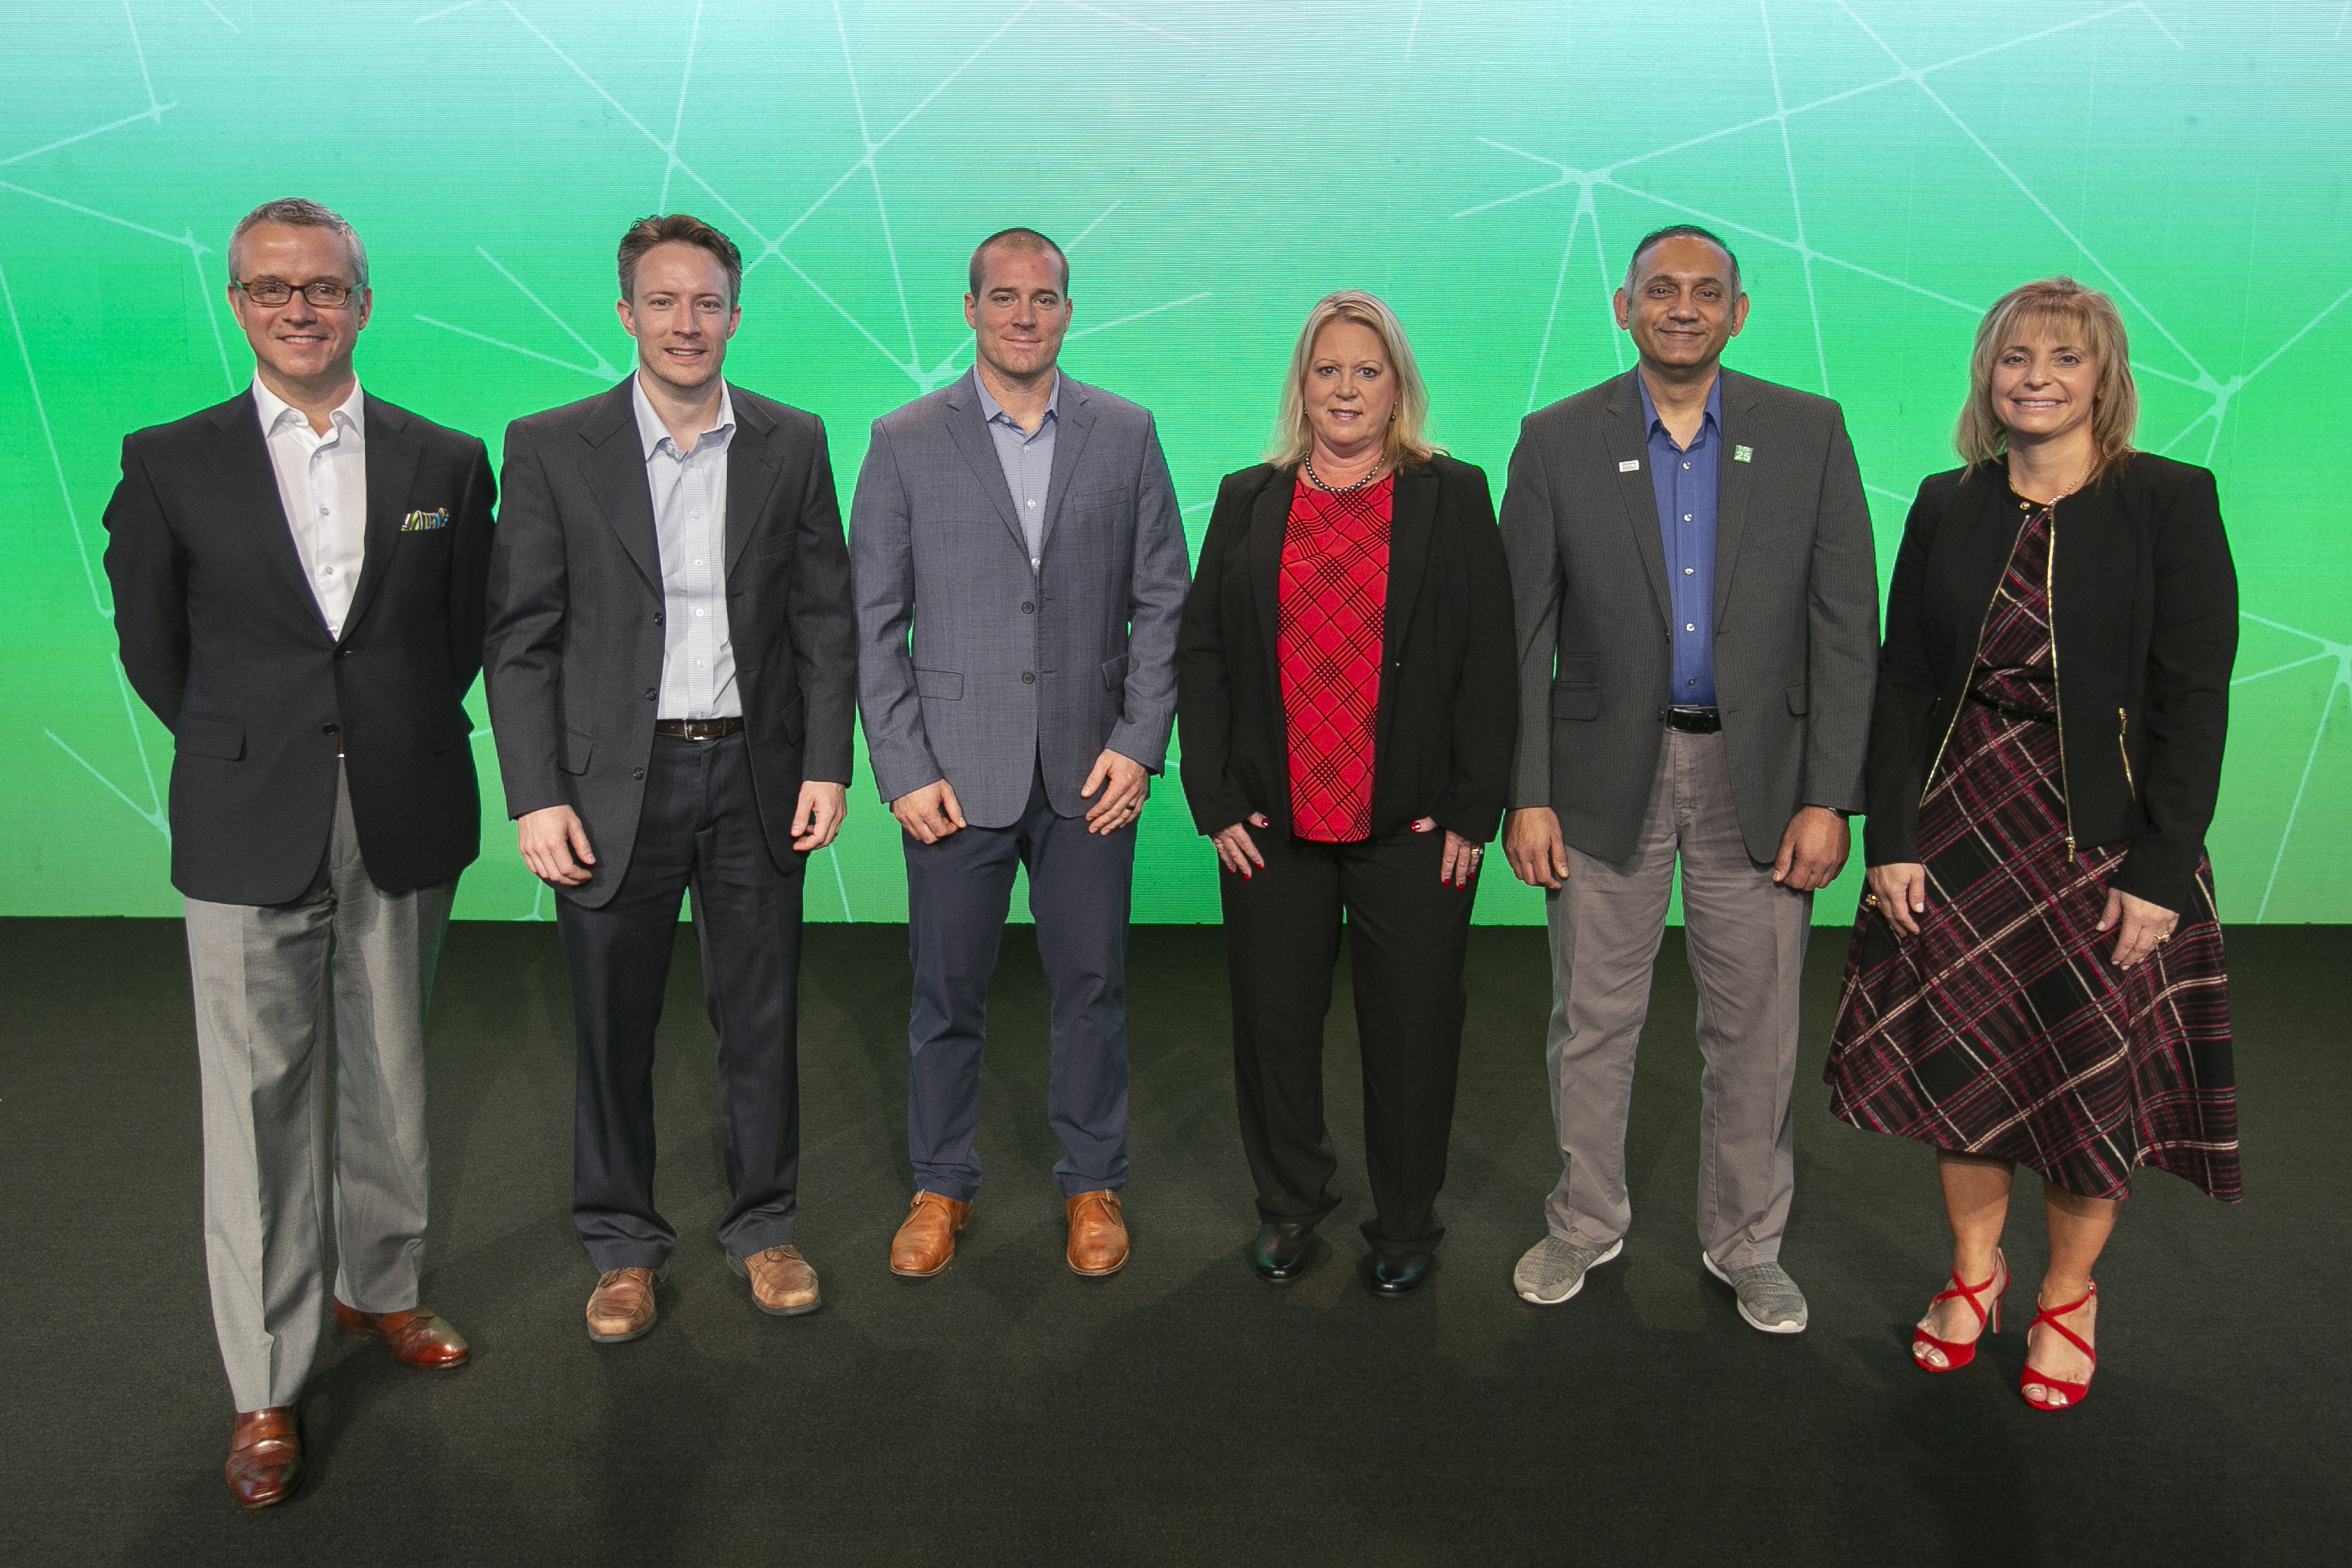 H&R Block's 2019 featured franchisees of the year